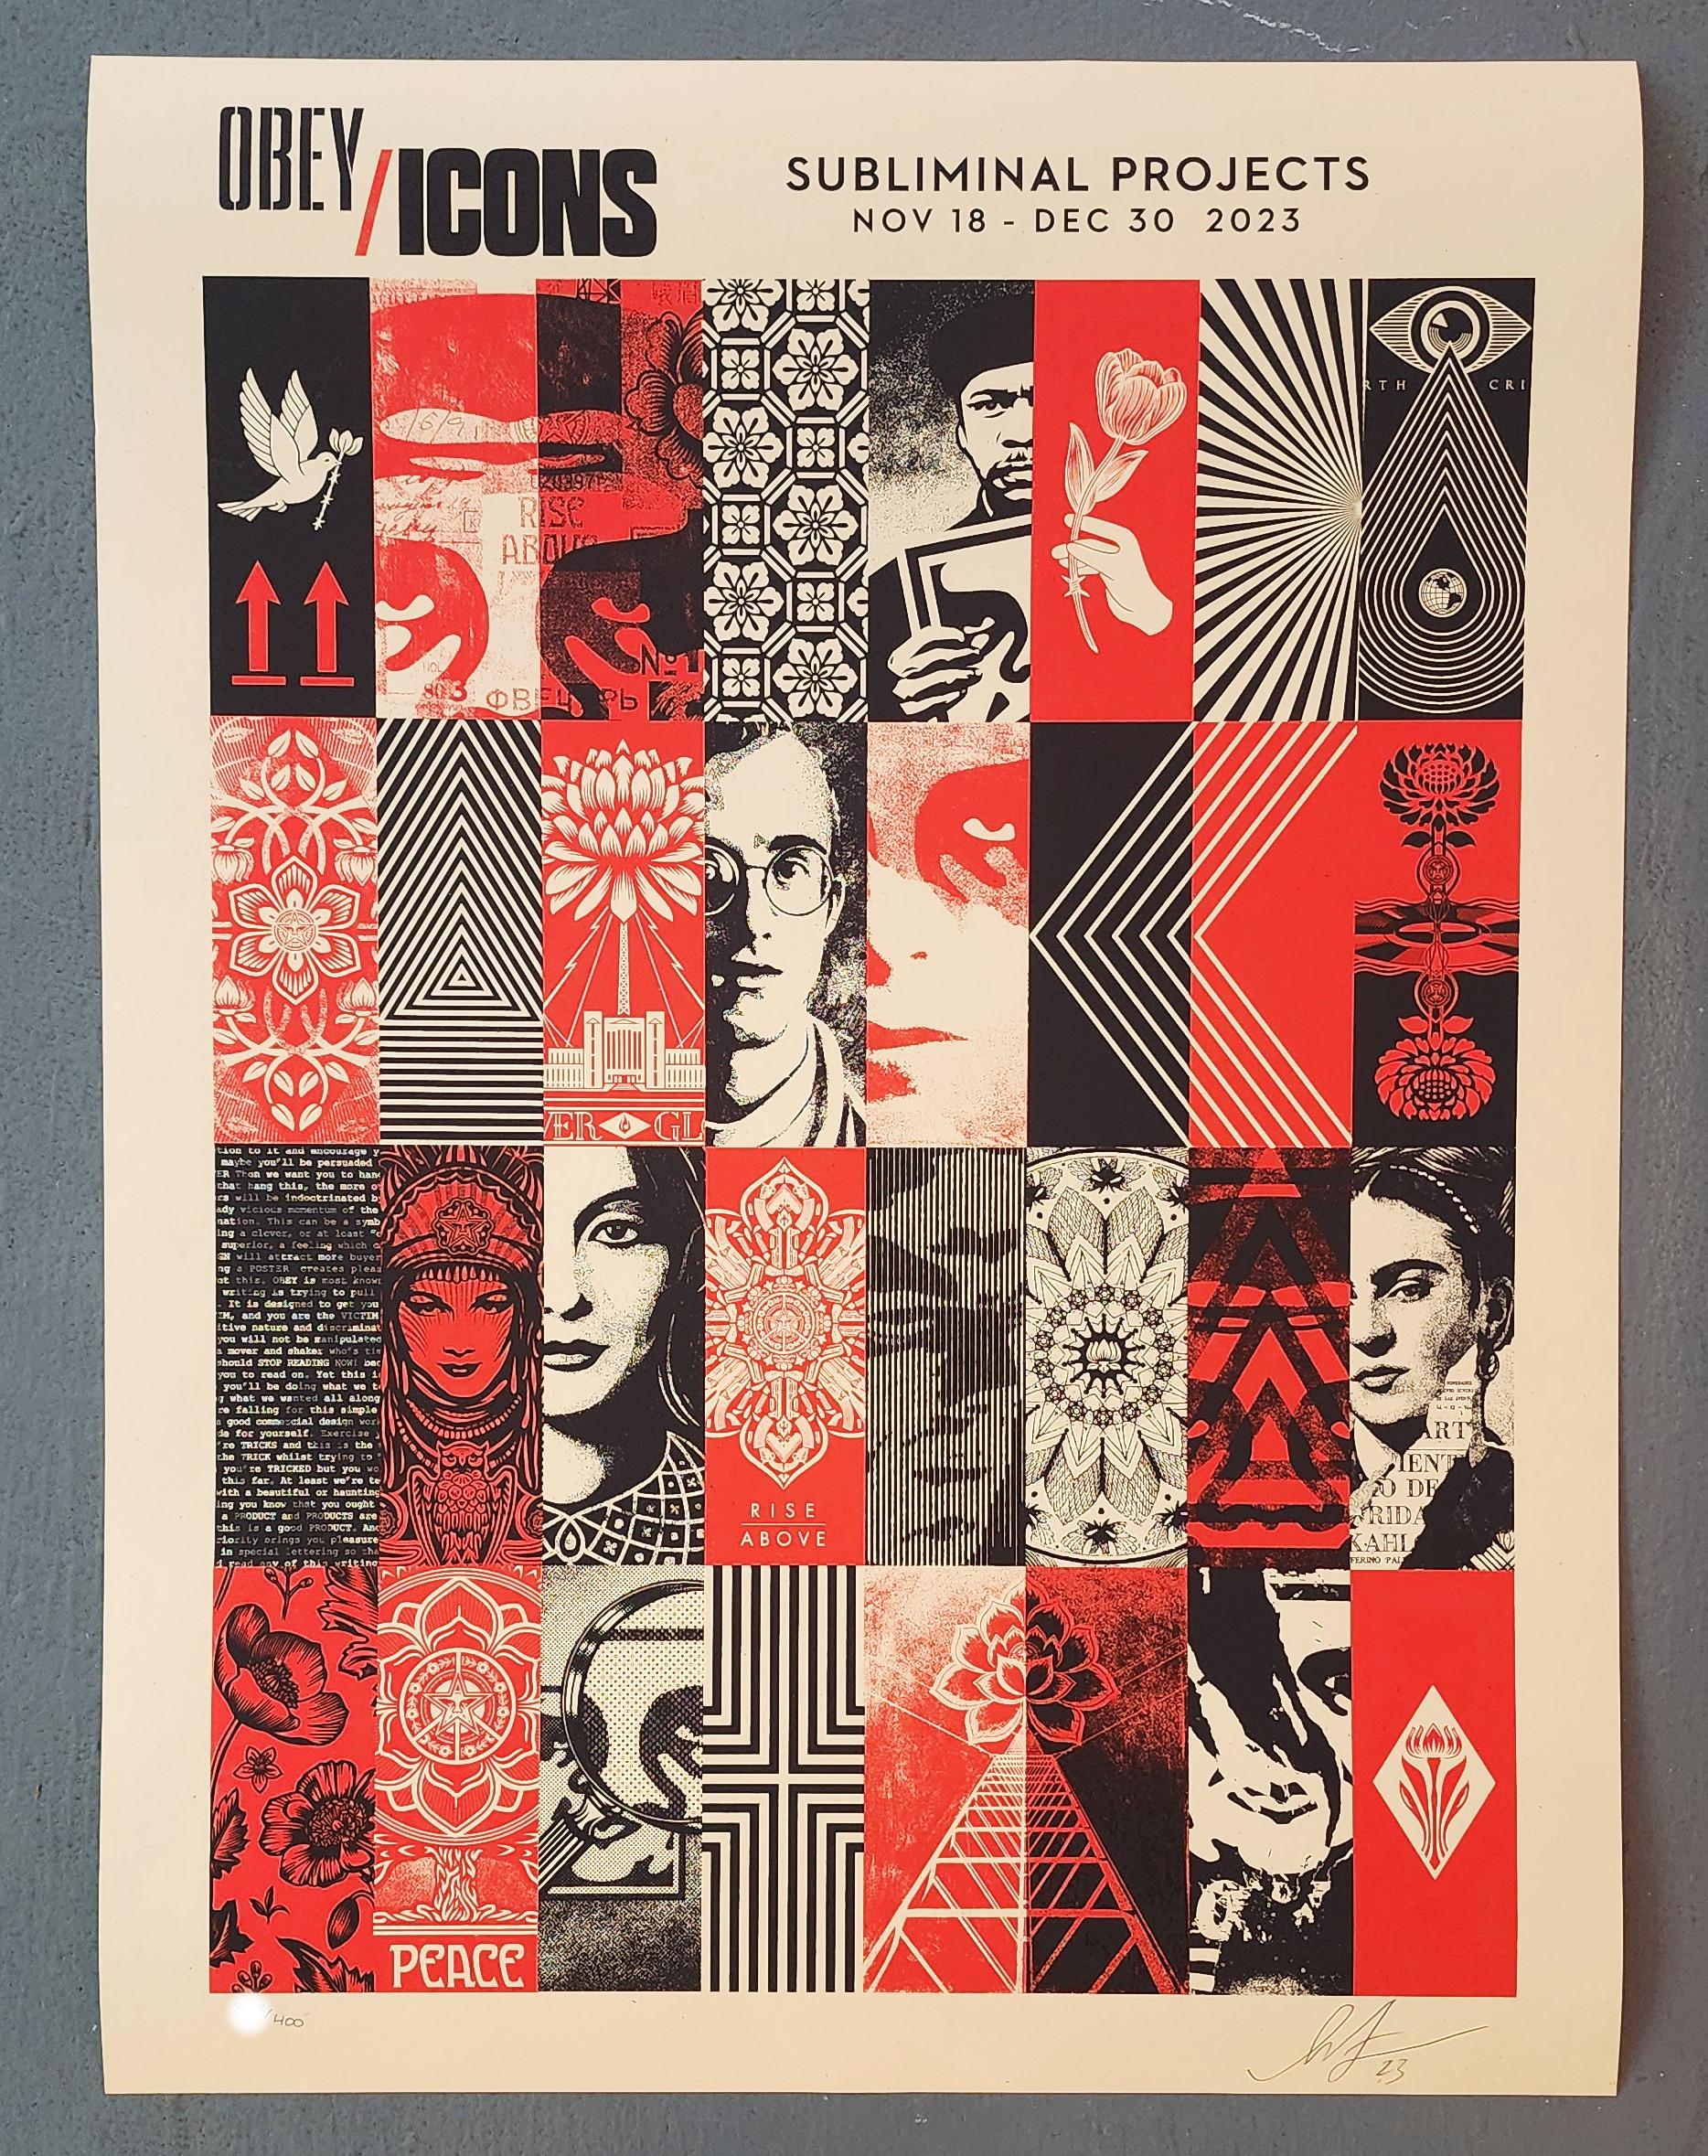 Shepard Fairey
ICONS (Subliminal, Iconic)
Screen print on thick cream White Speckletone paper
Year: 2023
Size: 24x18 inches
Edition: 400
Signed, dated and numbered by hand
COA provided
Ref.: 924802-2061

Tags: Subliminal, Iconic

Frank Shepard